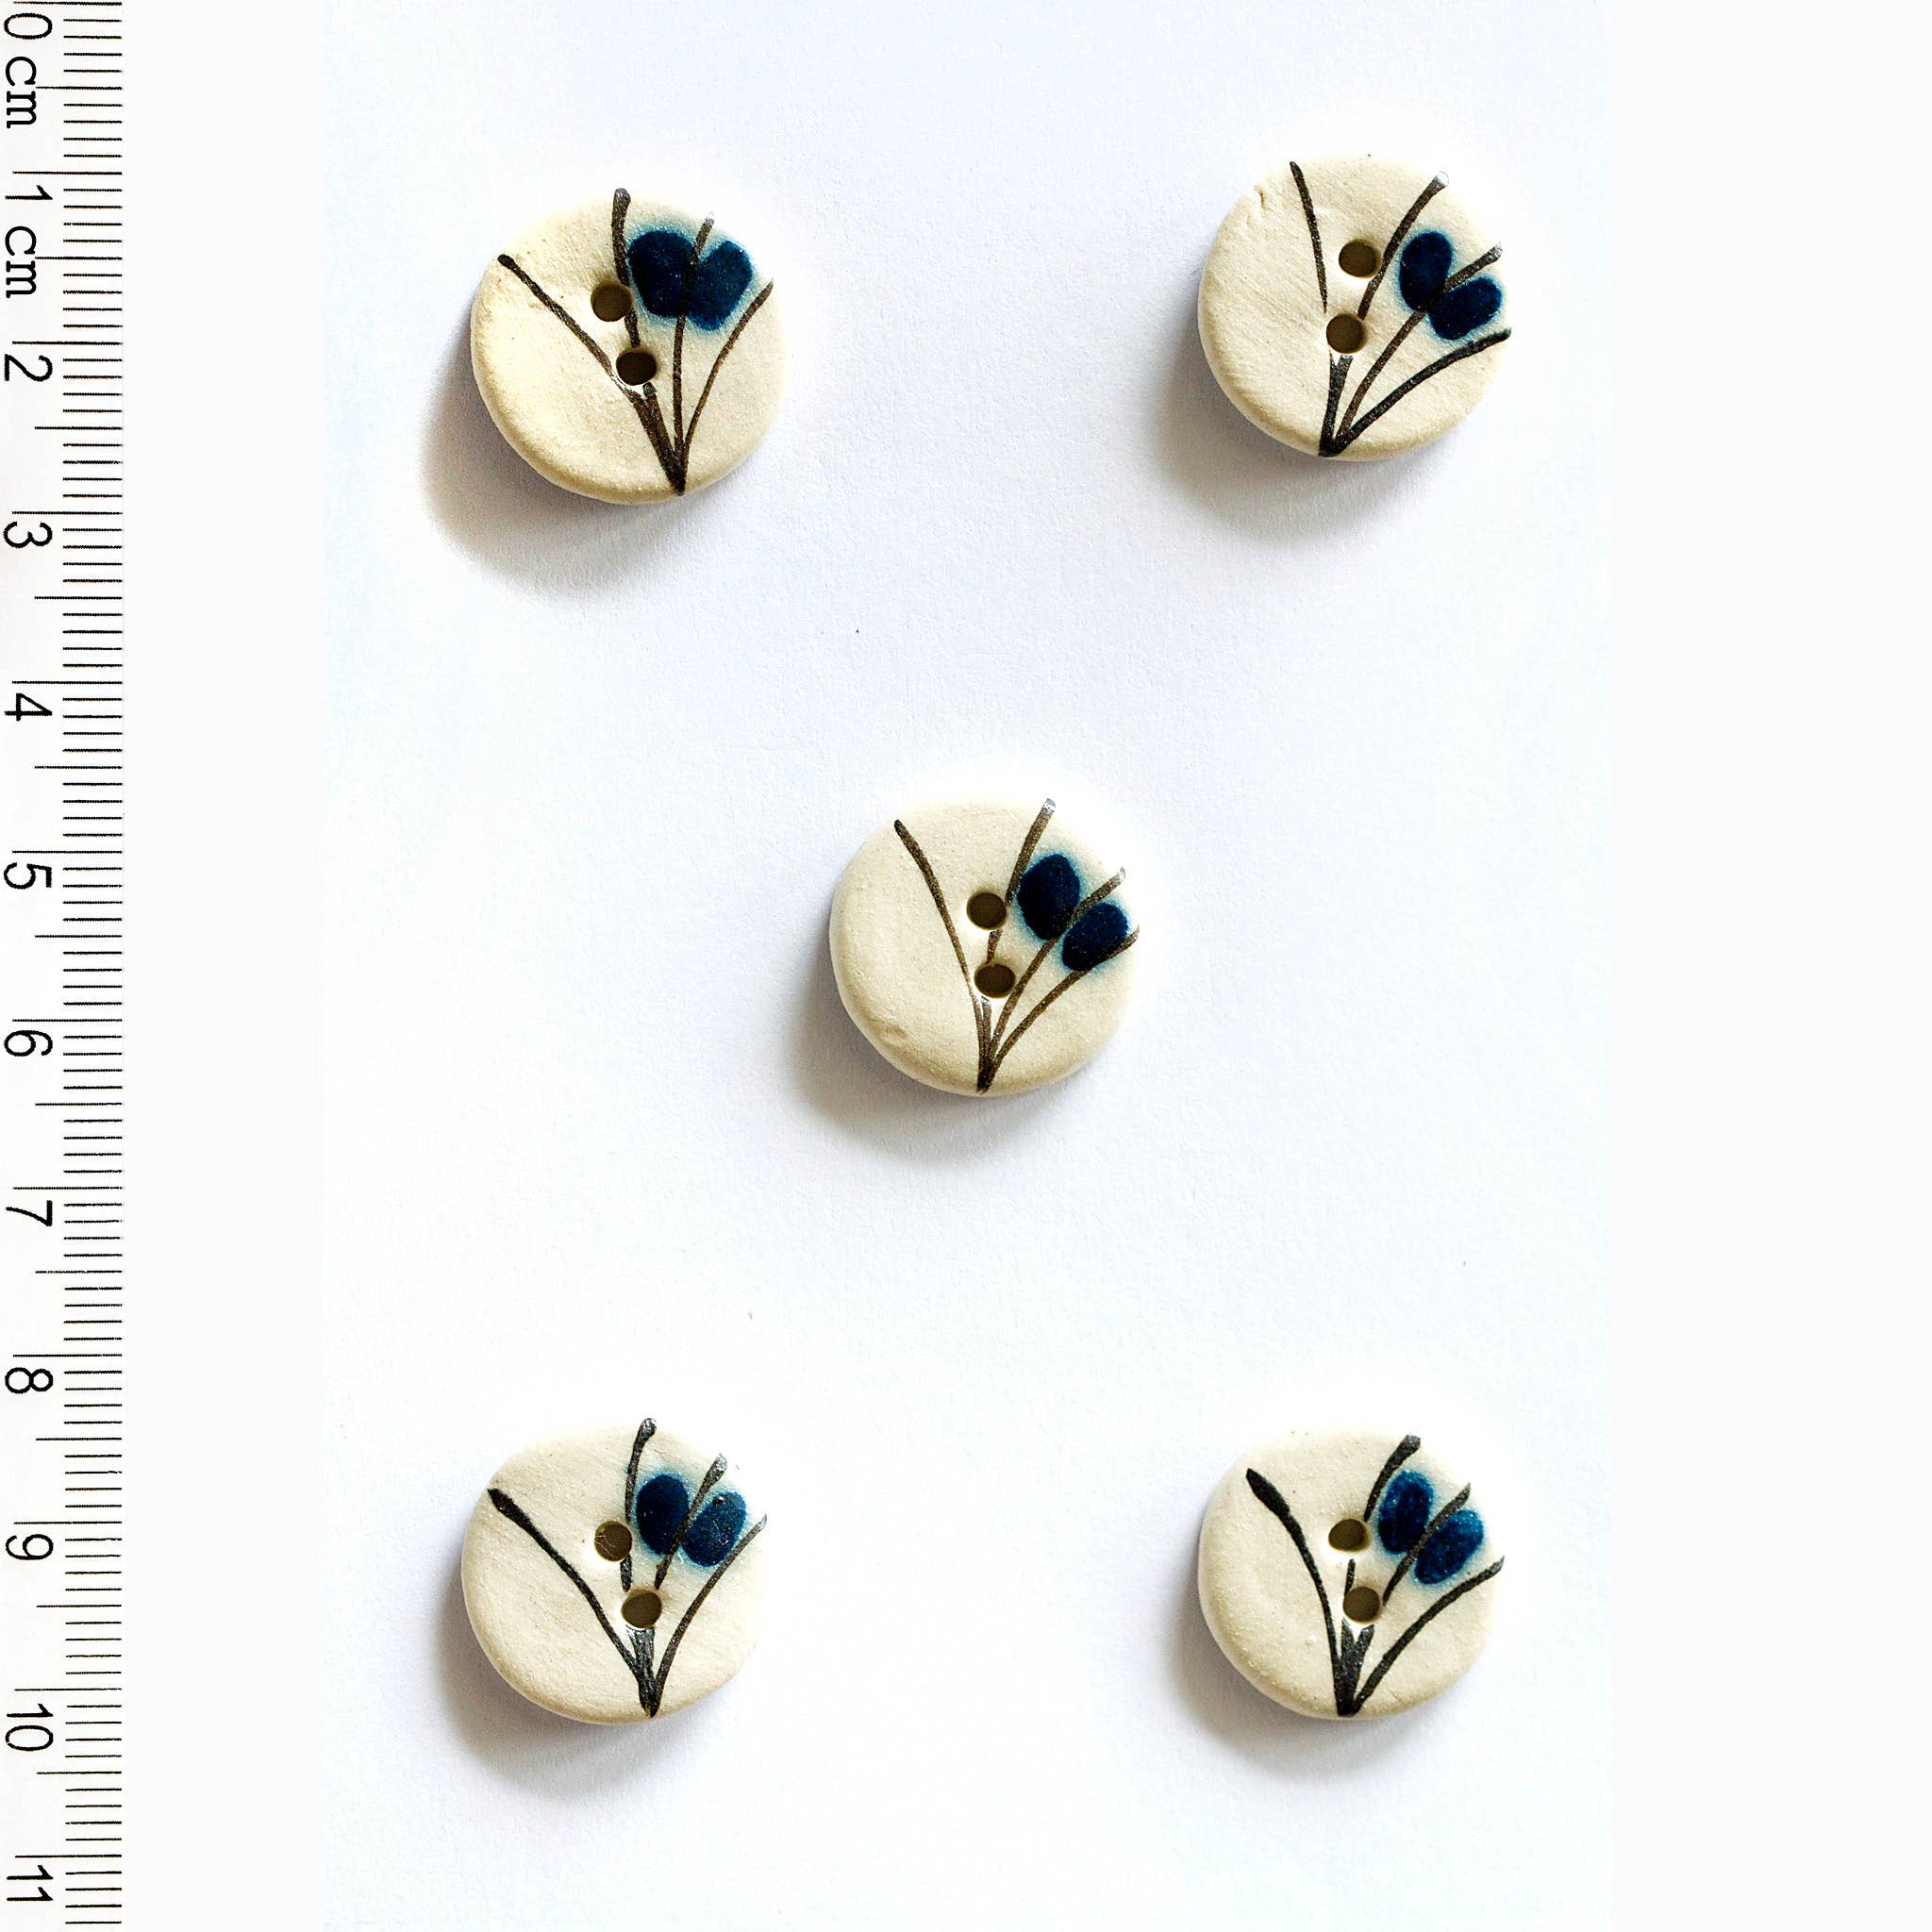 Incomparable Buttons - 5 Blue Floral Grass Buttons